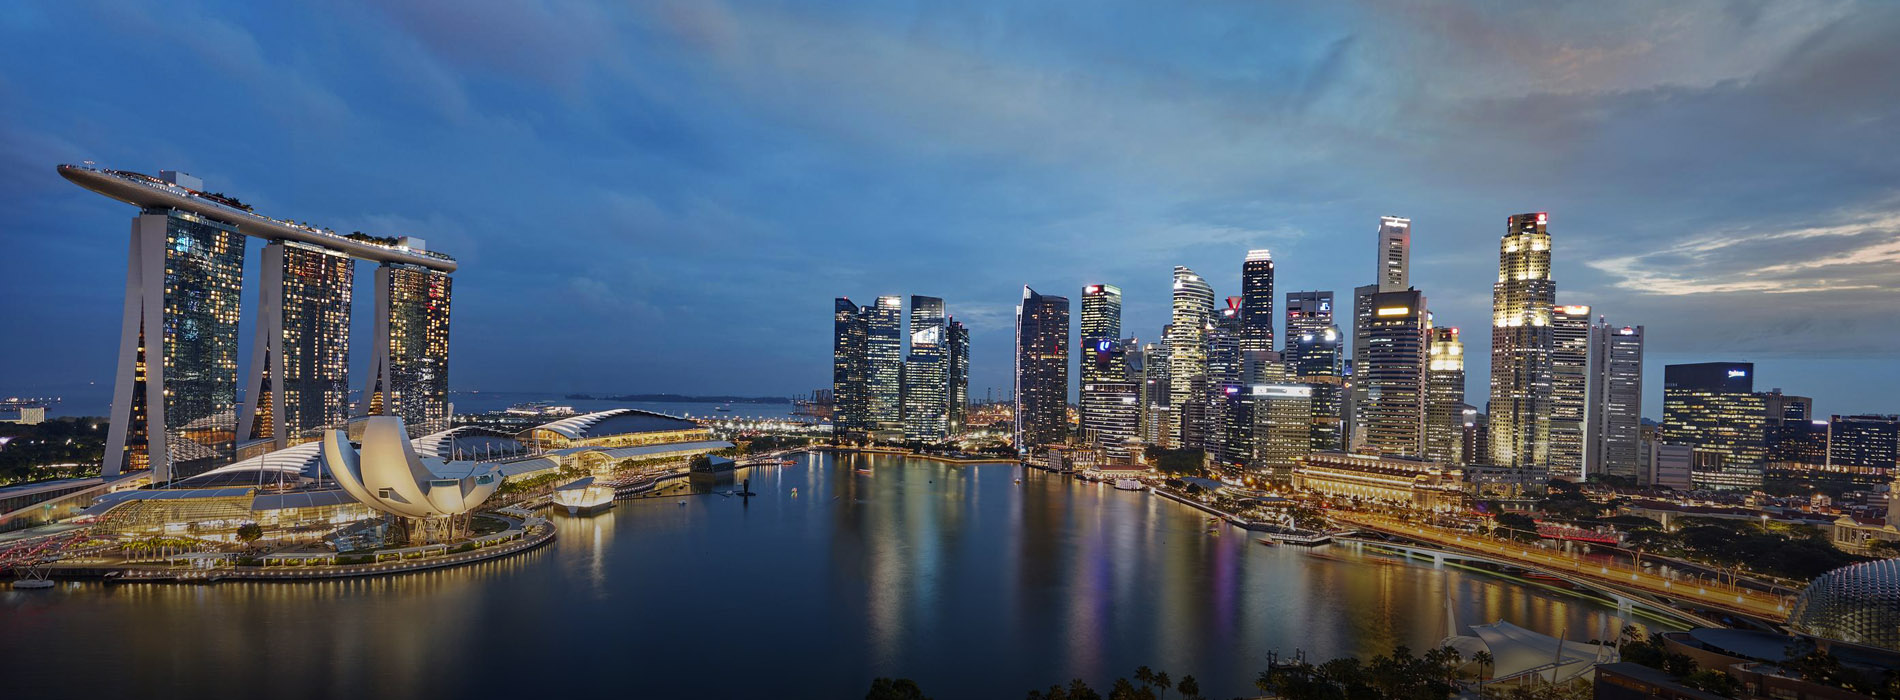 Malaysia And Singapore Tour Package From Saudi Arabia, 6 Nights 7 Days